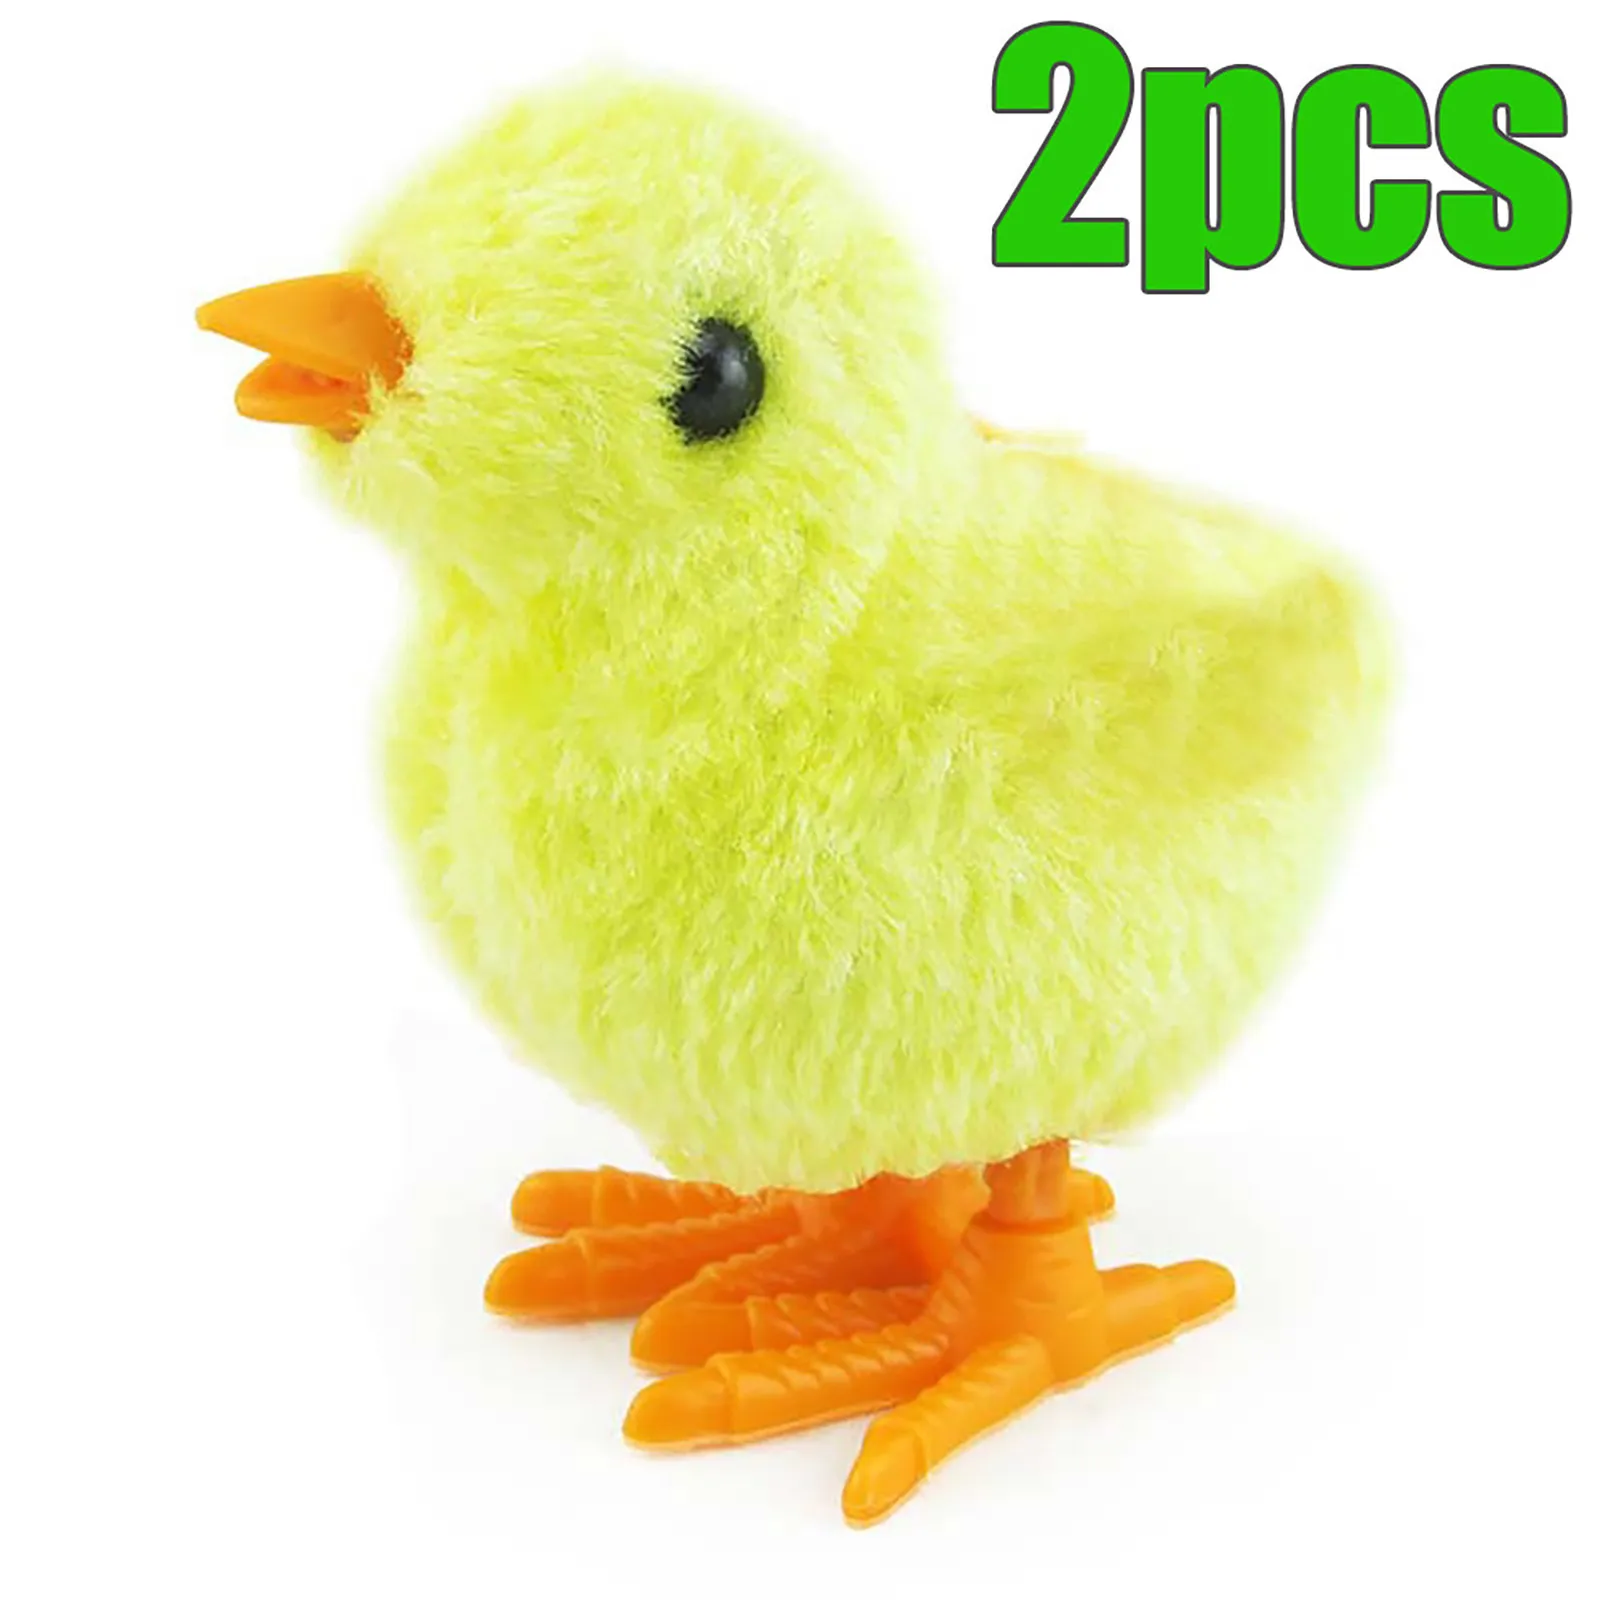 

2pcs Chicken Toy Funny Wind-up Hopping Jumping Chickens Clockwork Walking Toys For Kids Children Gift Soft Plush Jump Chick Toys